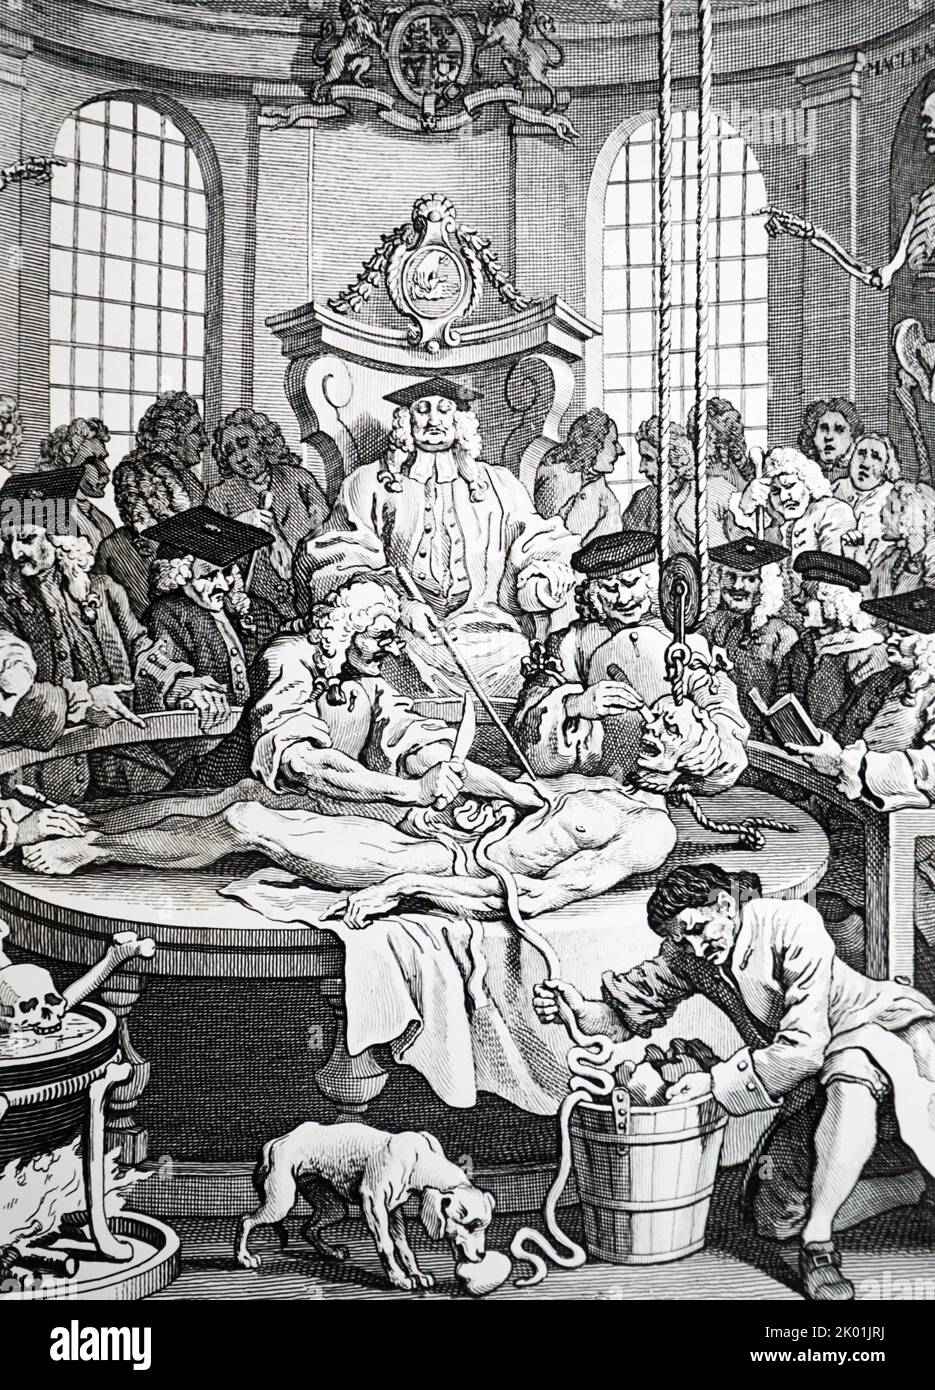 The Reward of Cruelty. The last of Hogarth's four plates entitled The Four Stages of Cruelty. After execution, the murderer's body was taken to Surgeon's Hall, and is shown here being dissected under the President's gaze. Engraving 1751. Stock Photo